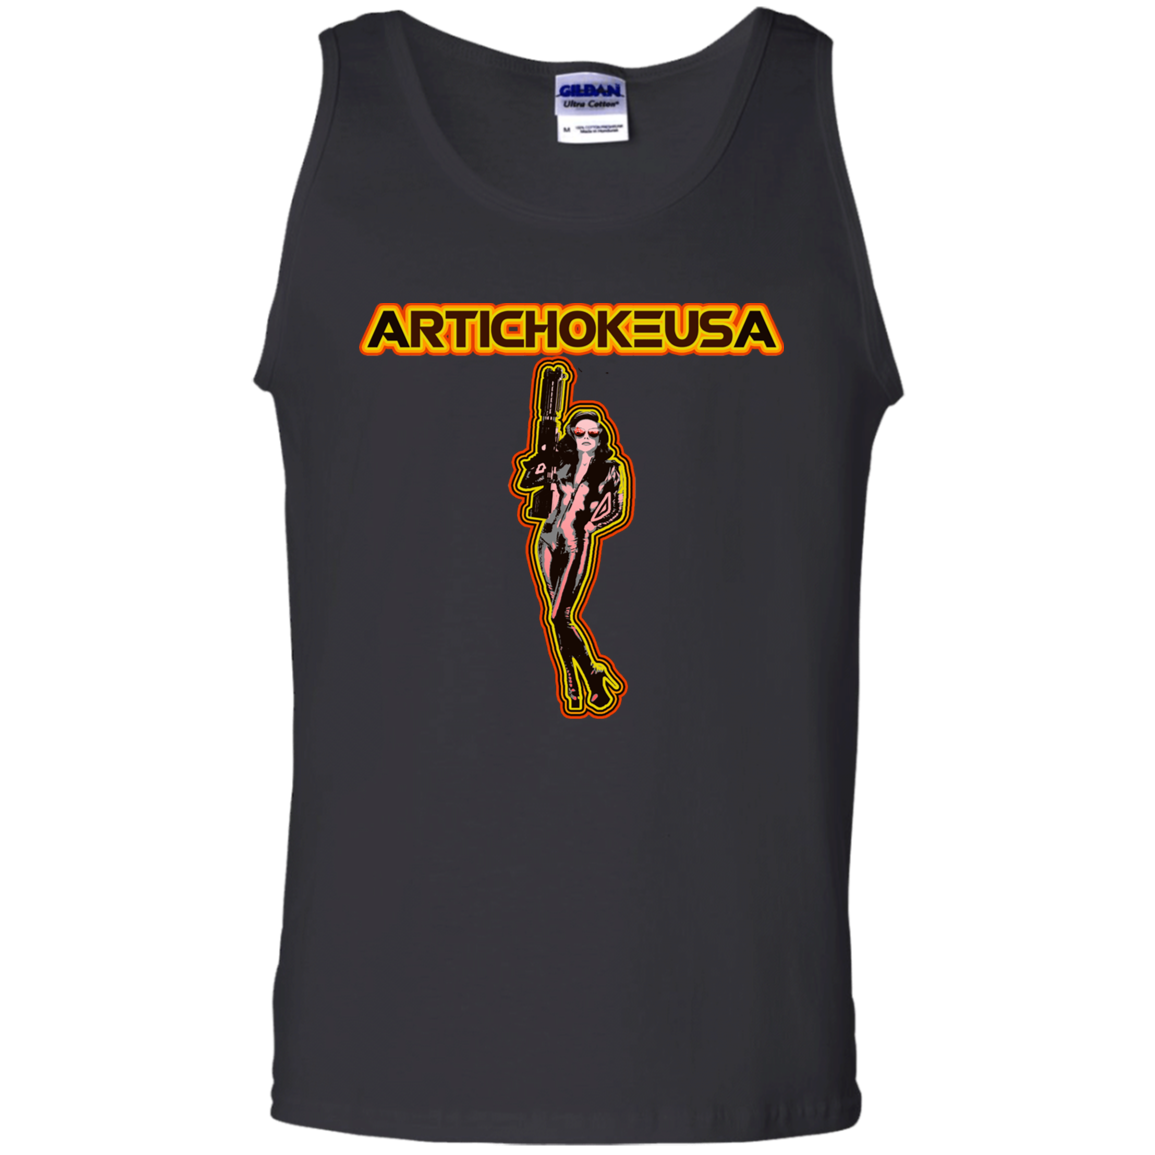 ArtichokeUSA Character and Font design. Let's Create Your Own Team Design Today. Mary Boom Boom. Men's 100% Cotton Tank Top